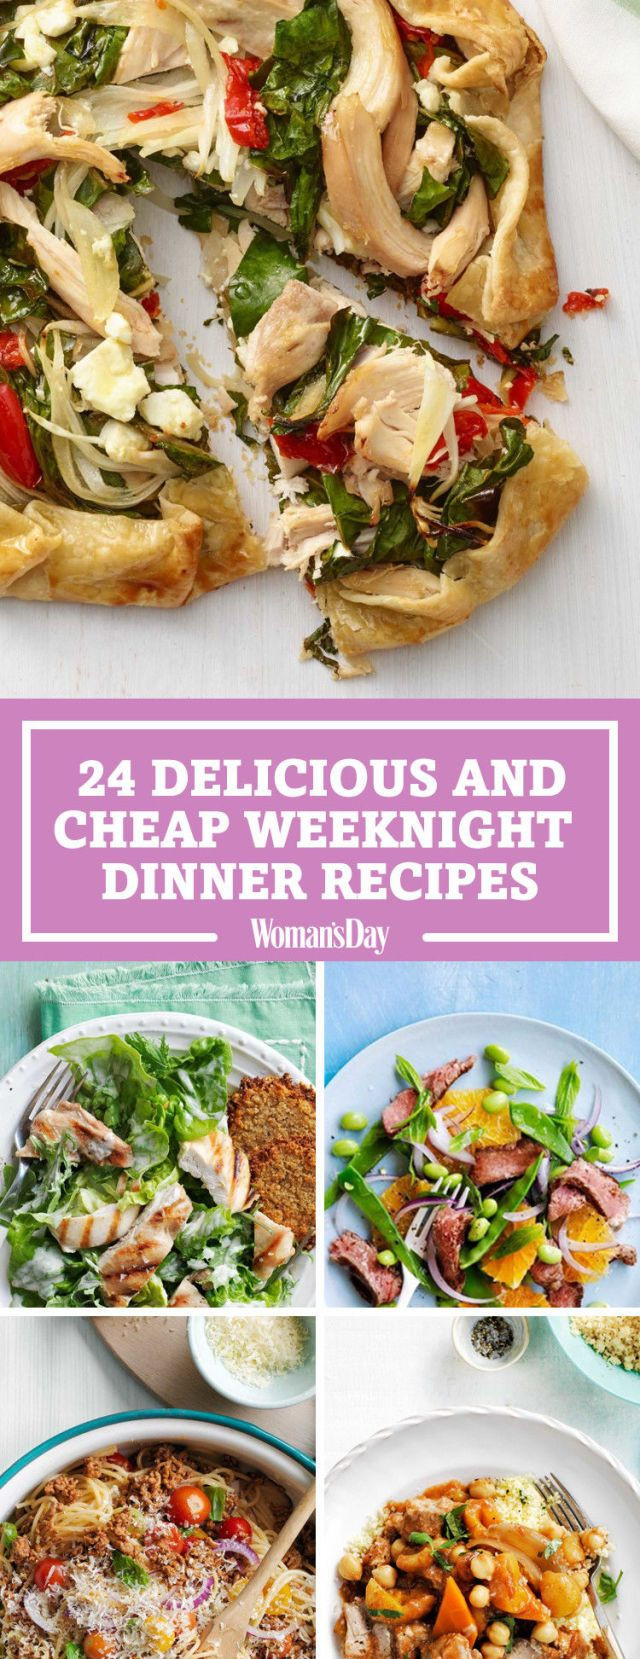 Easy Cheap Dinner Recipes
 100 Cheap Dinner Ideas – Easy Recipes for Inexpensive Meals